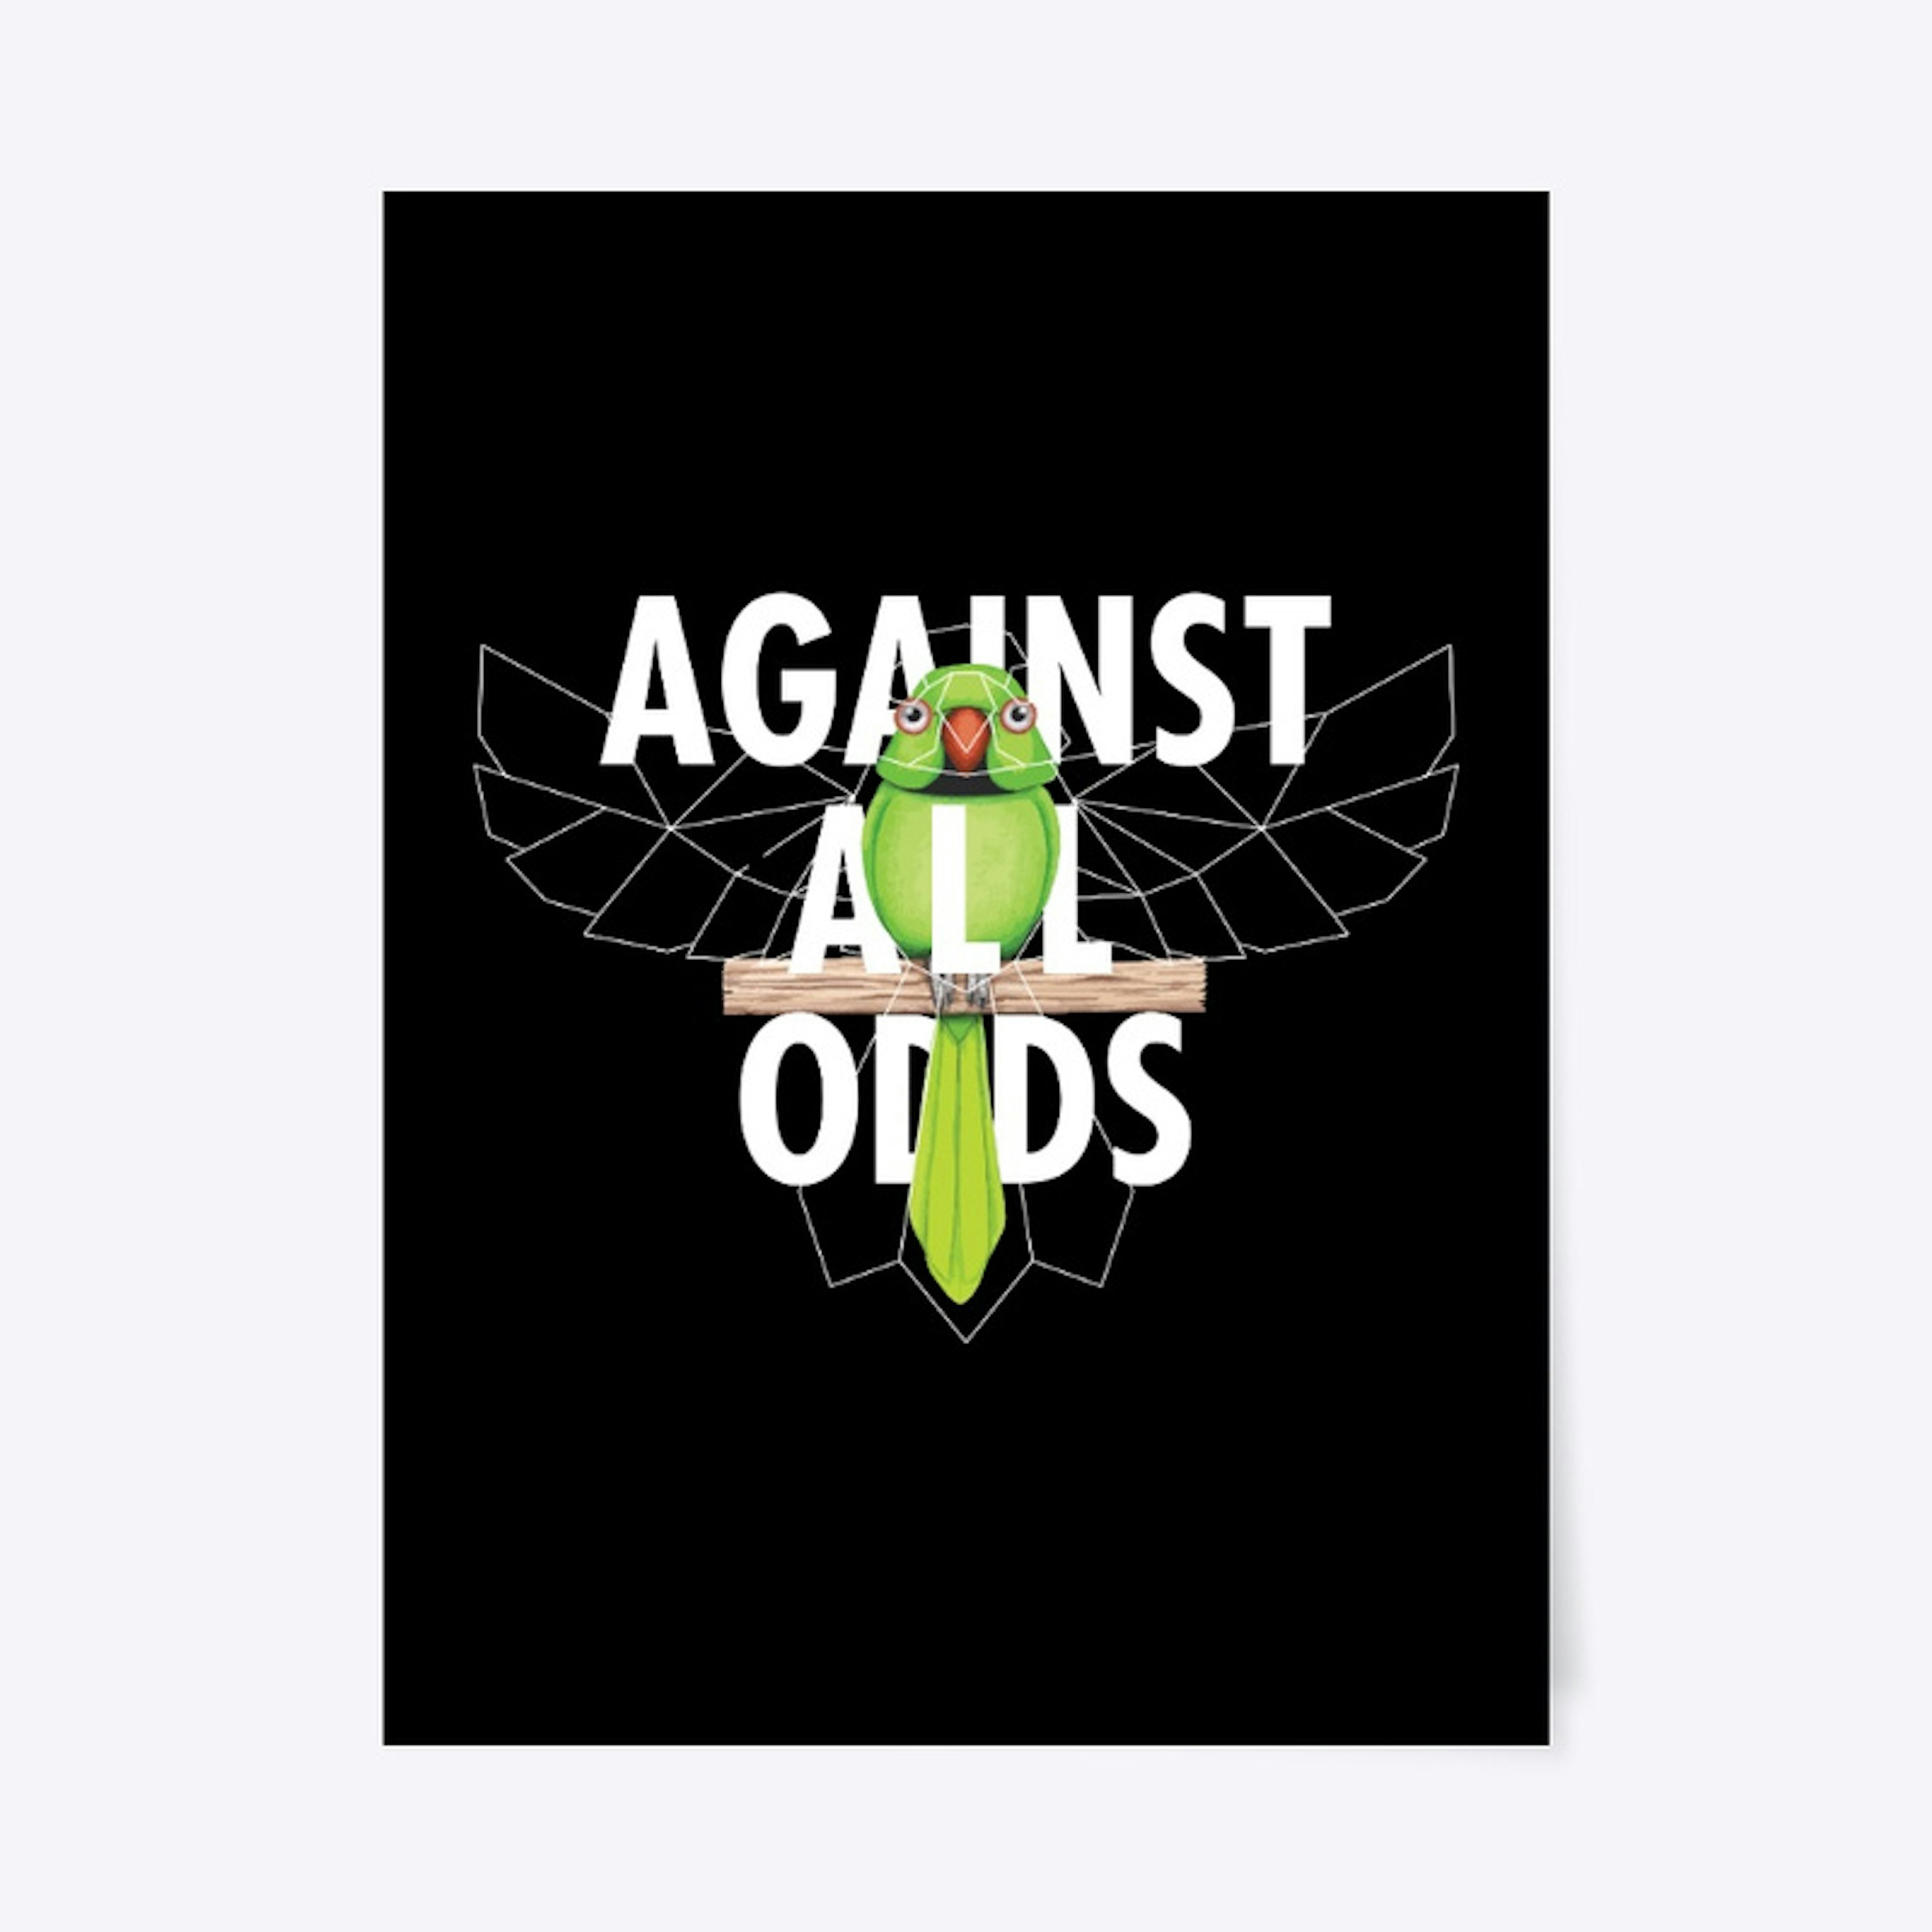 Touche - Against All Odds